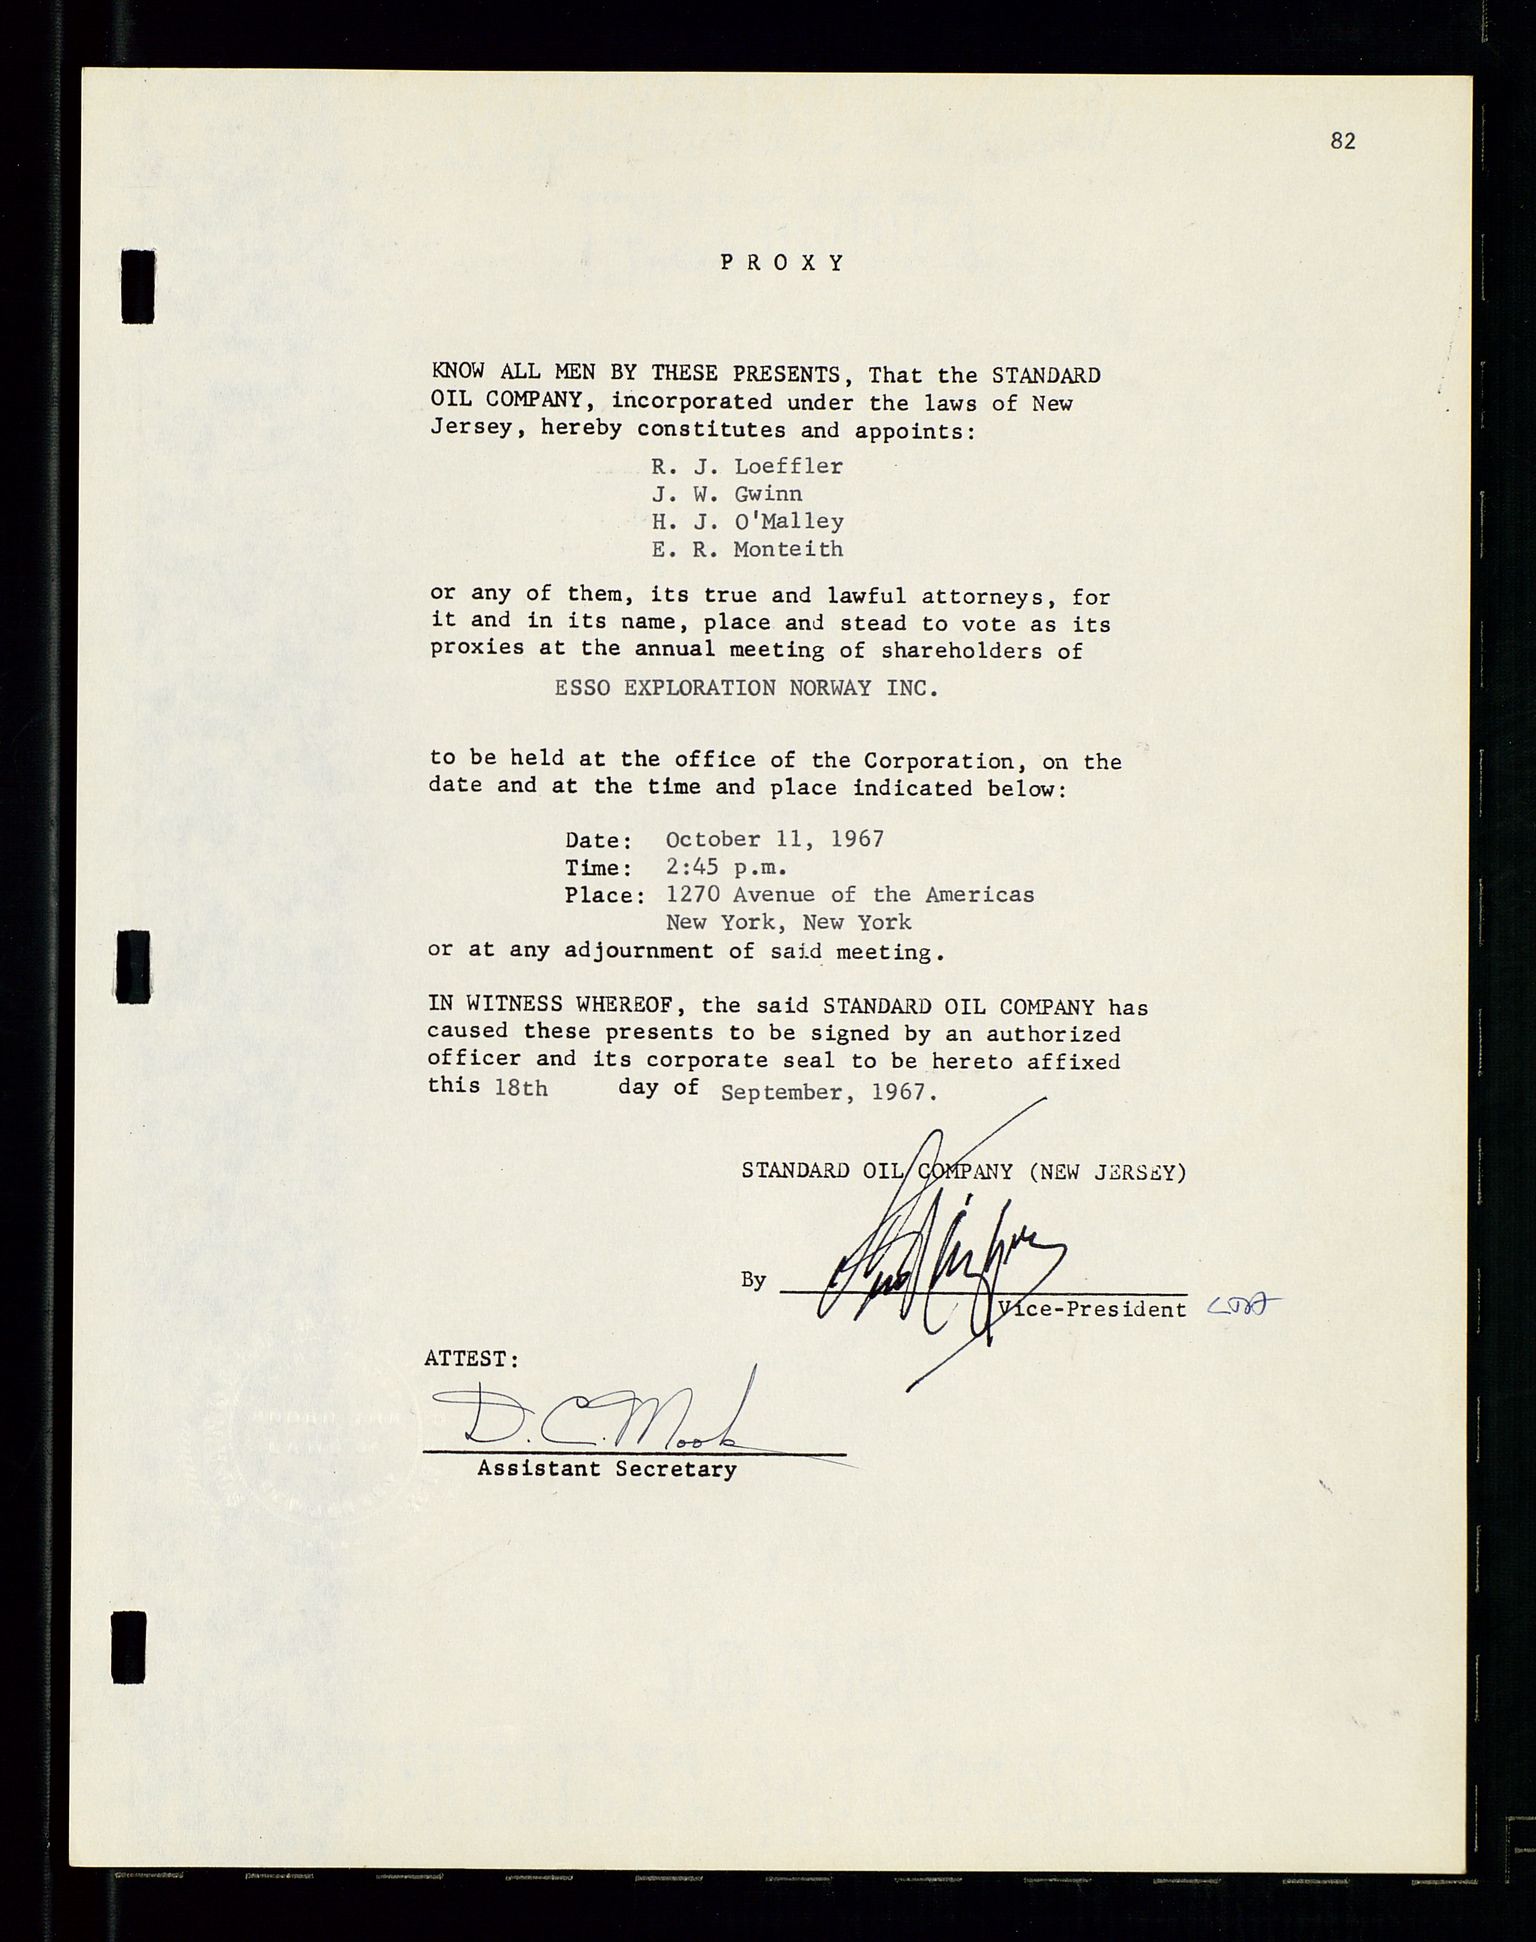 Pa 1512 - Esso Exploration and Production Norway Inc., SAST/A-101917/A/Aa/L0001/0001: Styredokumenter / Corporate records, By-Laws, Board meeting minutes, Incorporations, 1965-1975, s. 82